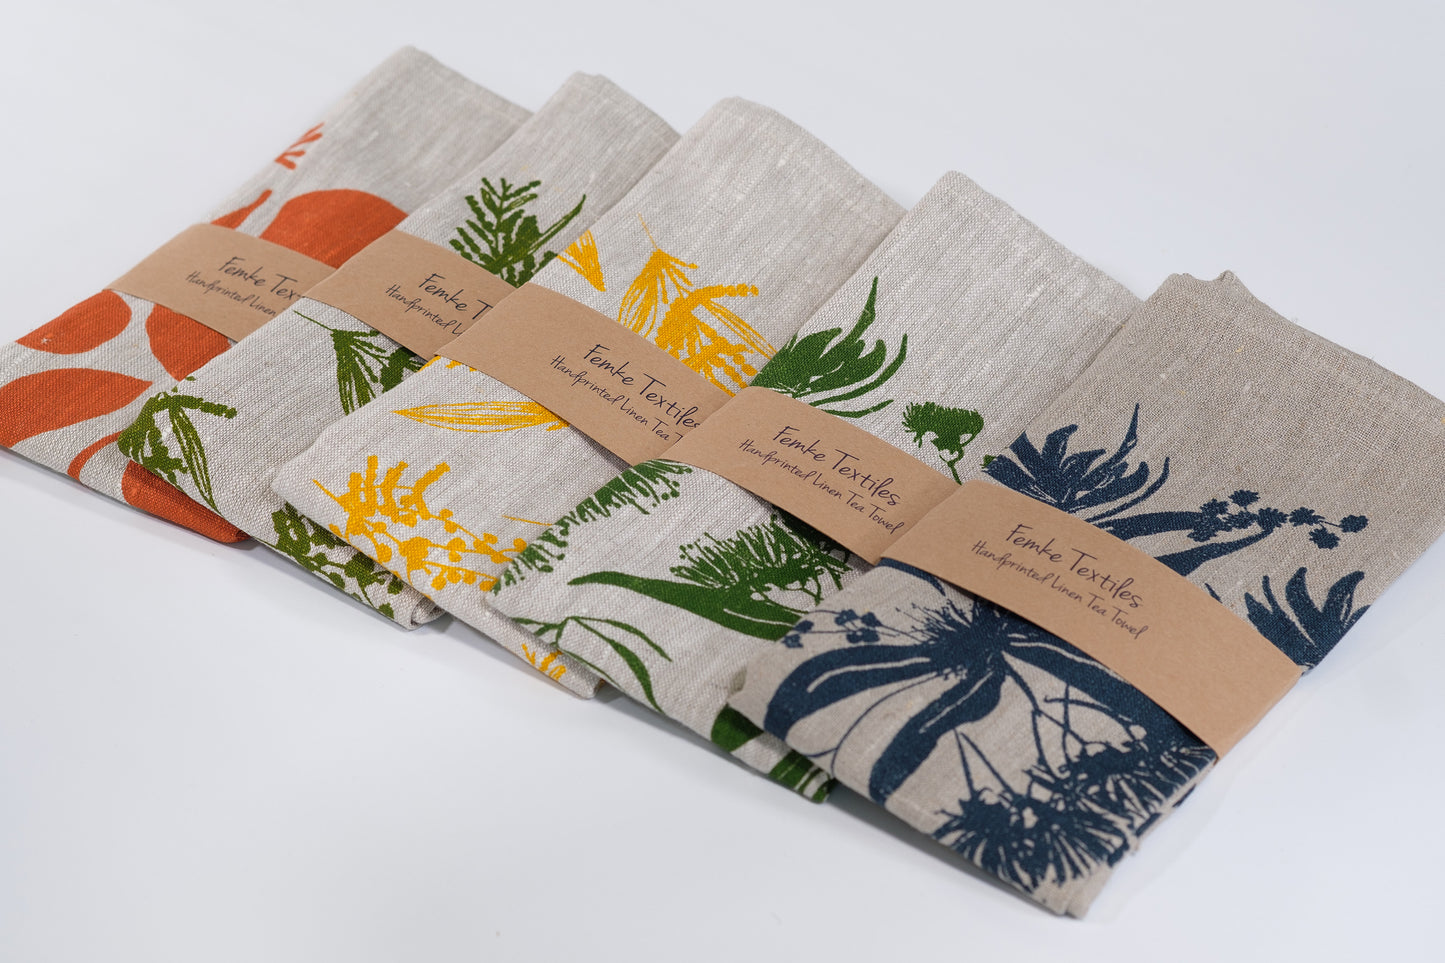 Linen tea towels featuring seedpods, wattle and local forage designs. Screen printed and designed by Femke Textiles